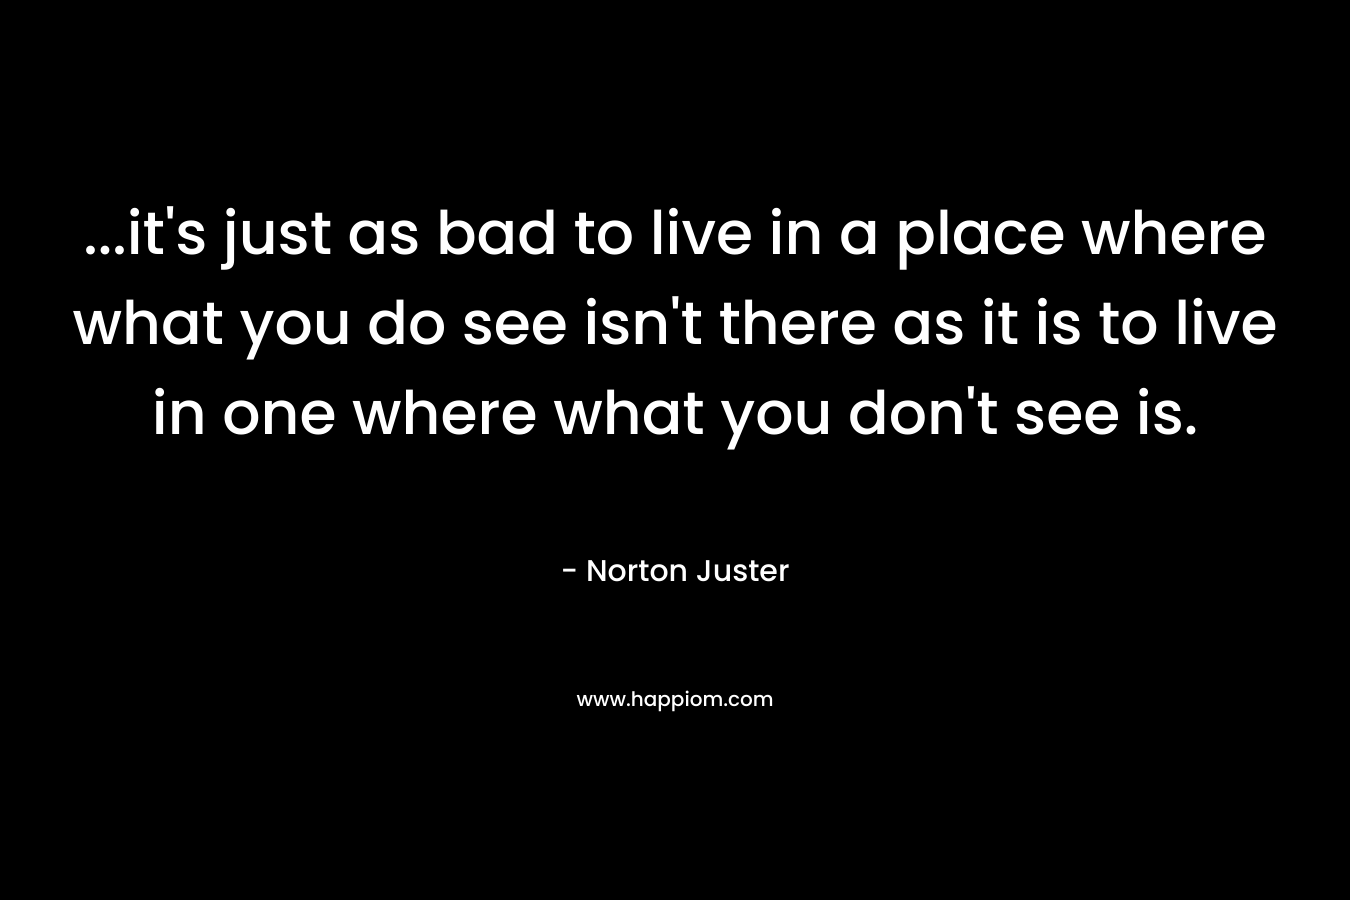 ...it's just as bad to live in a place where what you do see isn't there as it is to live in one where what you don't see is.